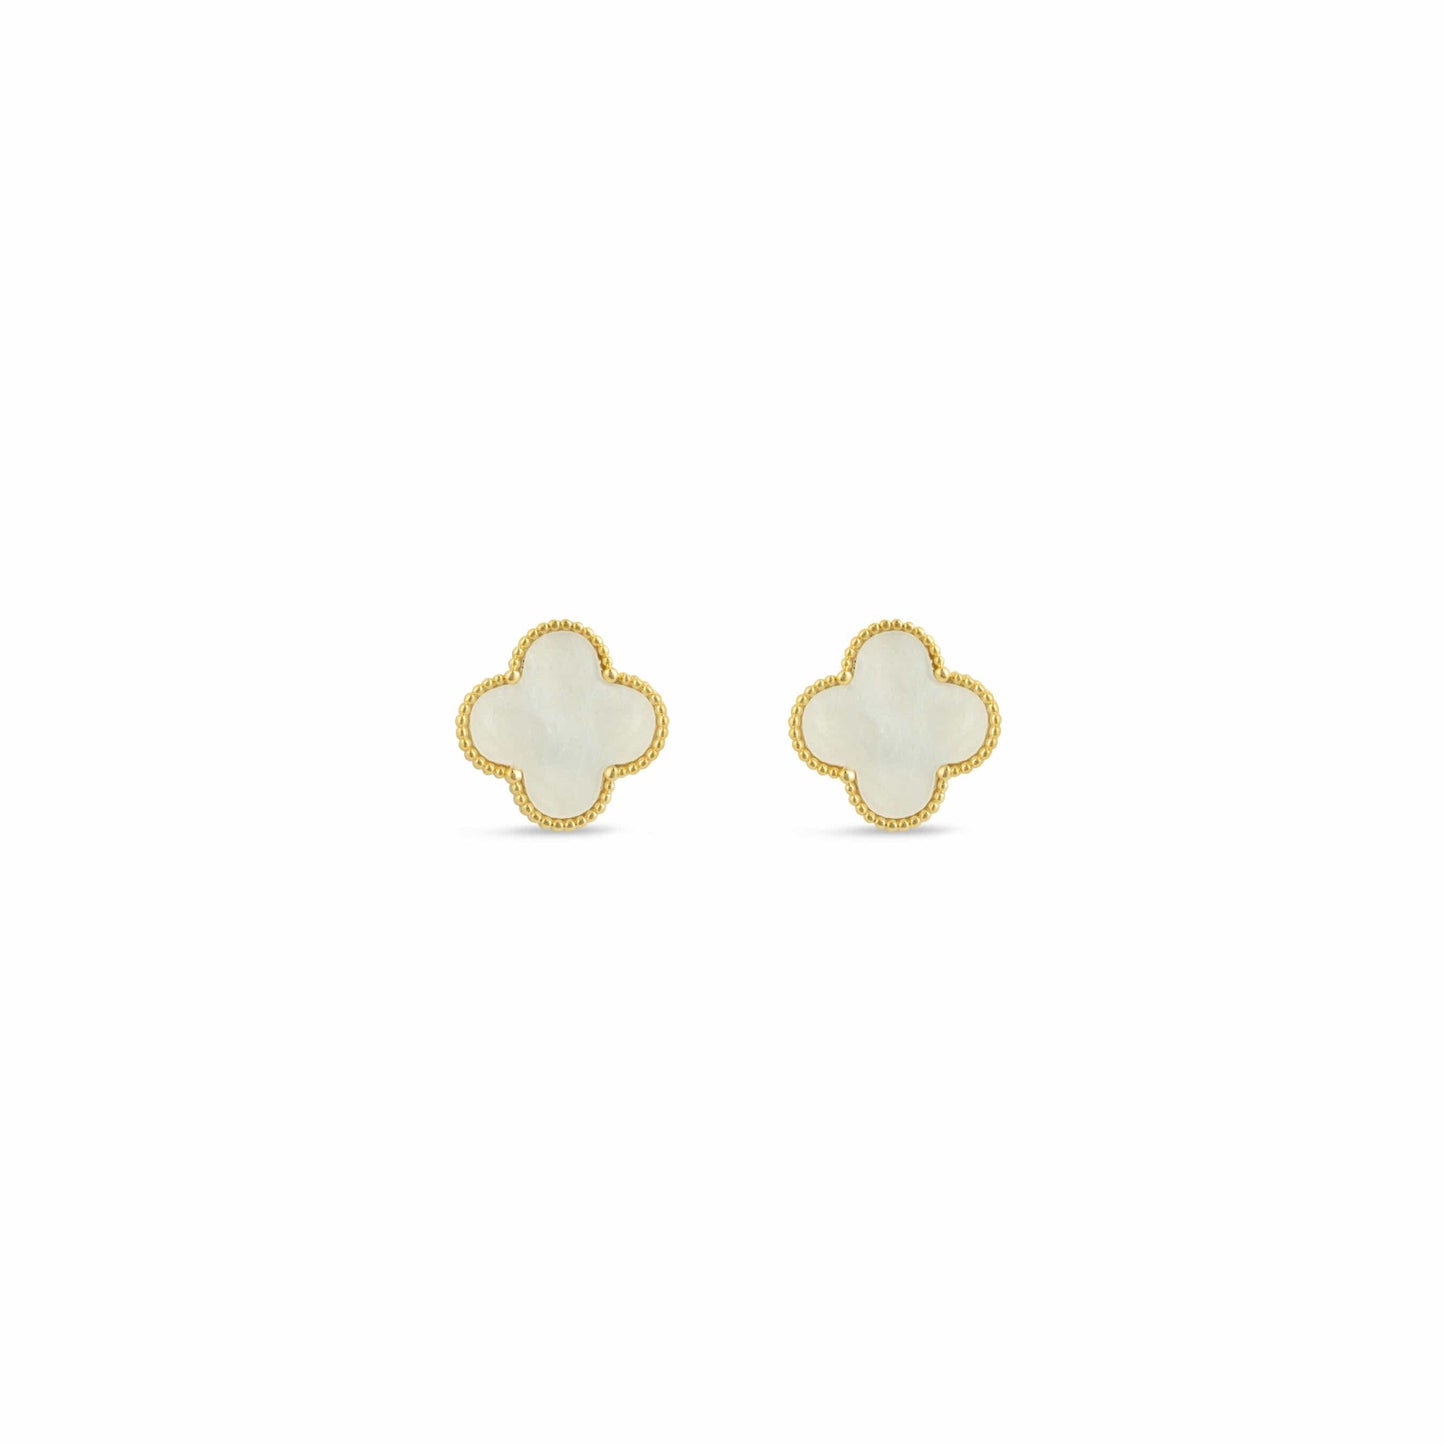 Gold Mother of Pearl Mini Clover Stud Earrings - Love & Lilly Jewellery